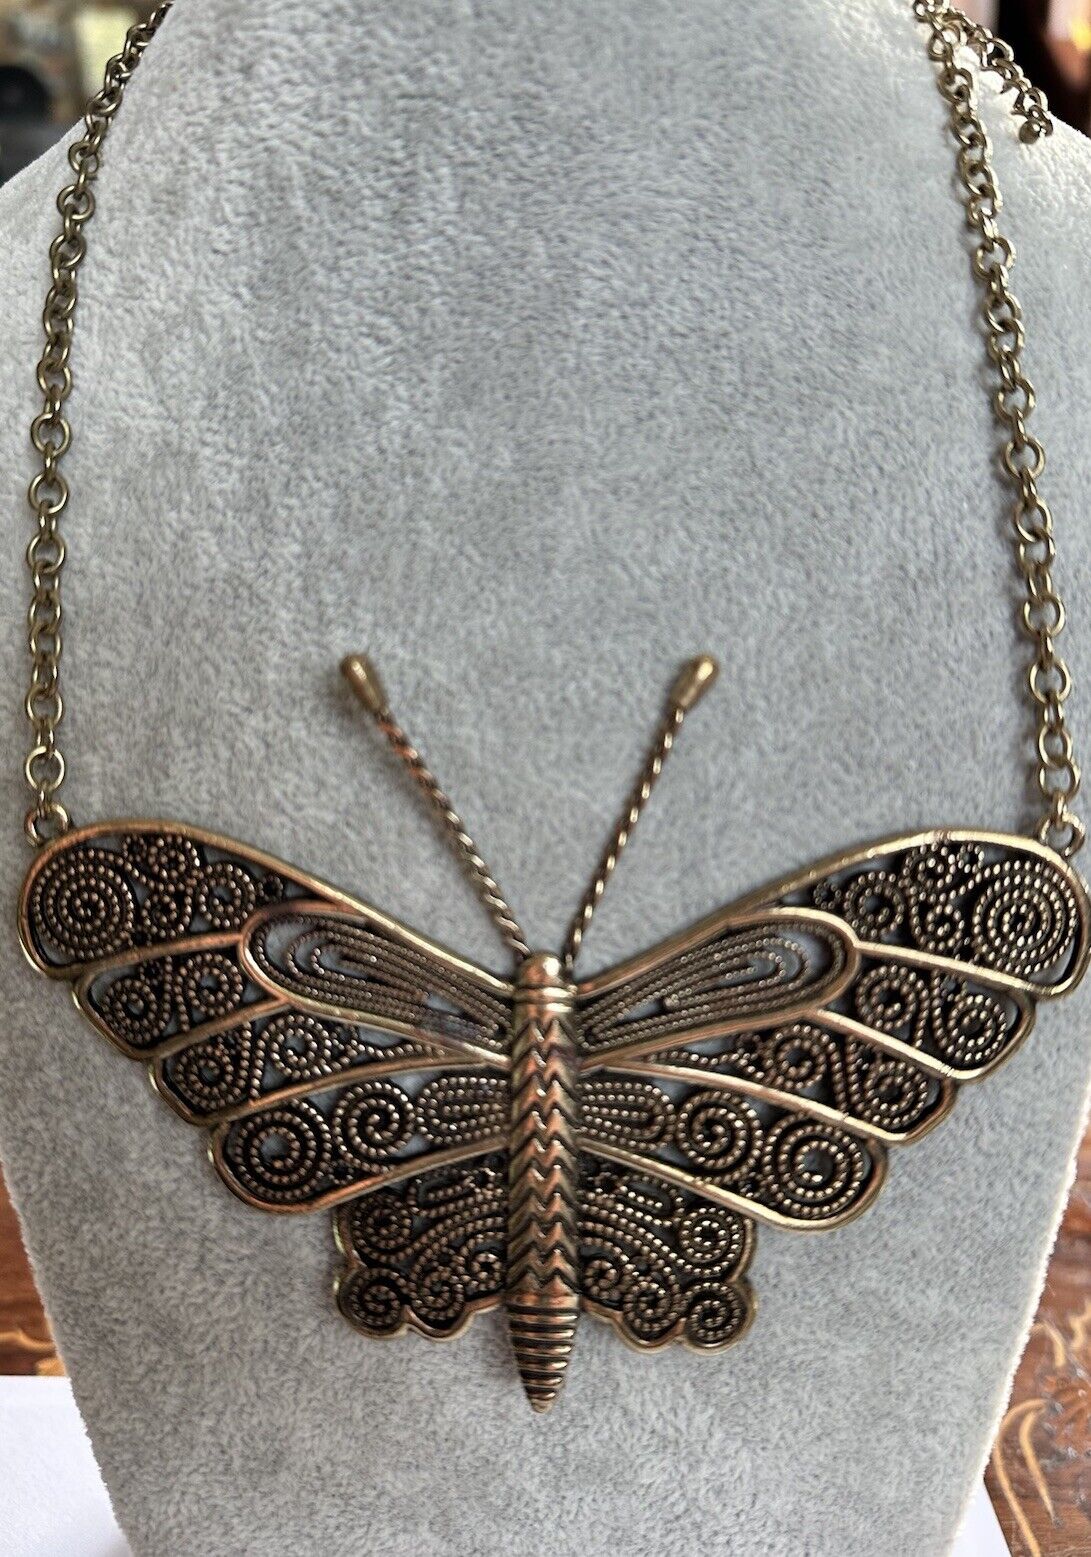 Vintage Cut Out Metal Large Butterfly Necklace